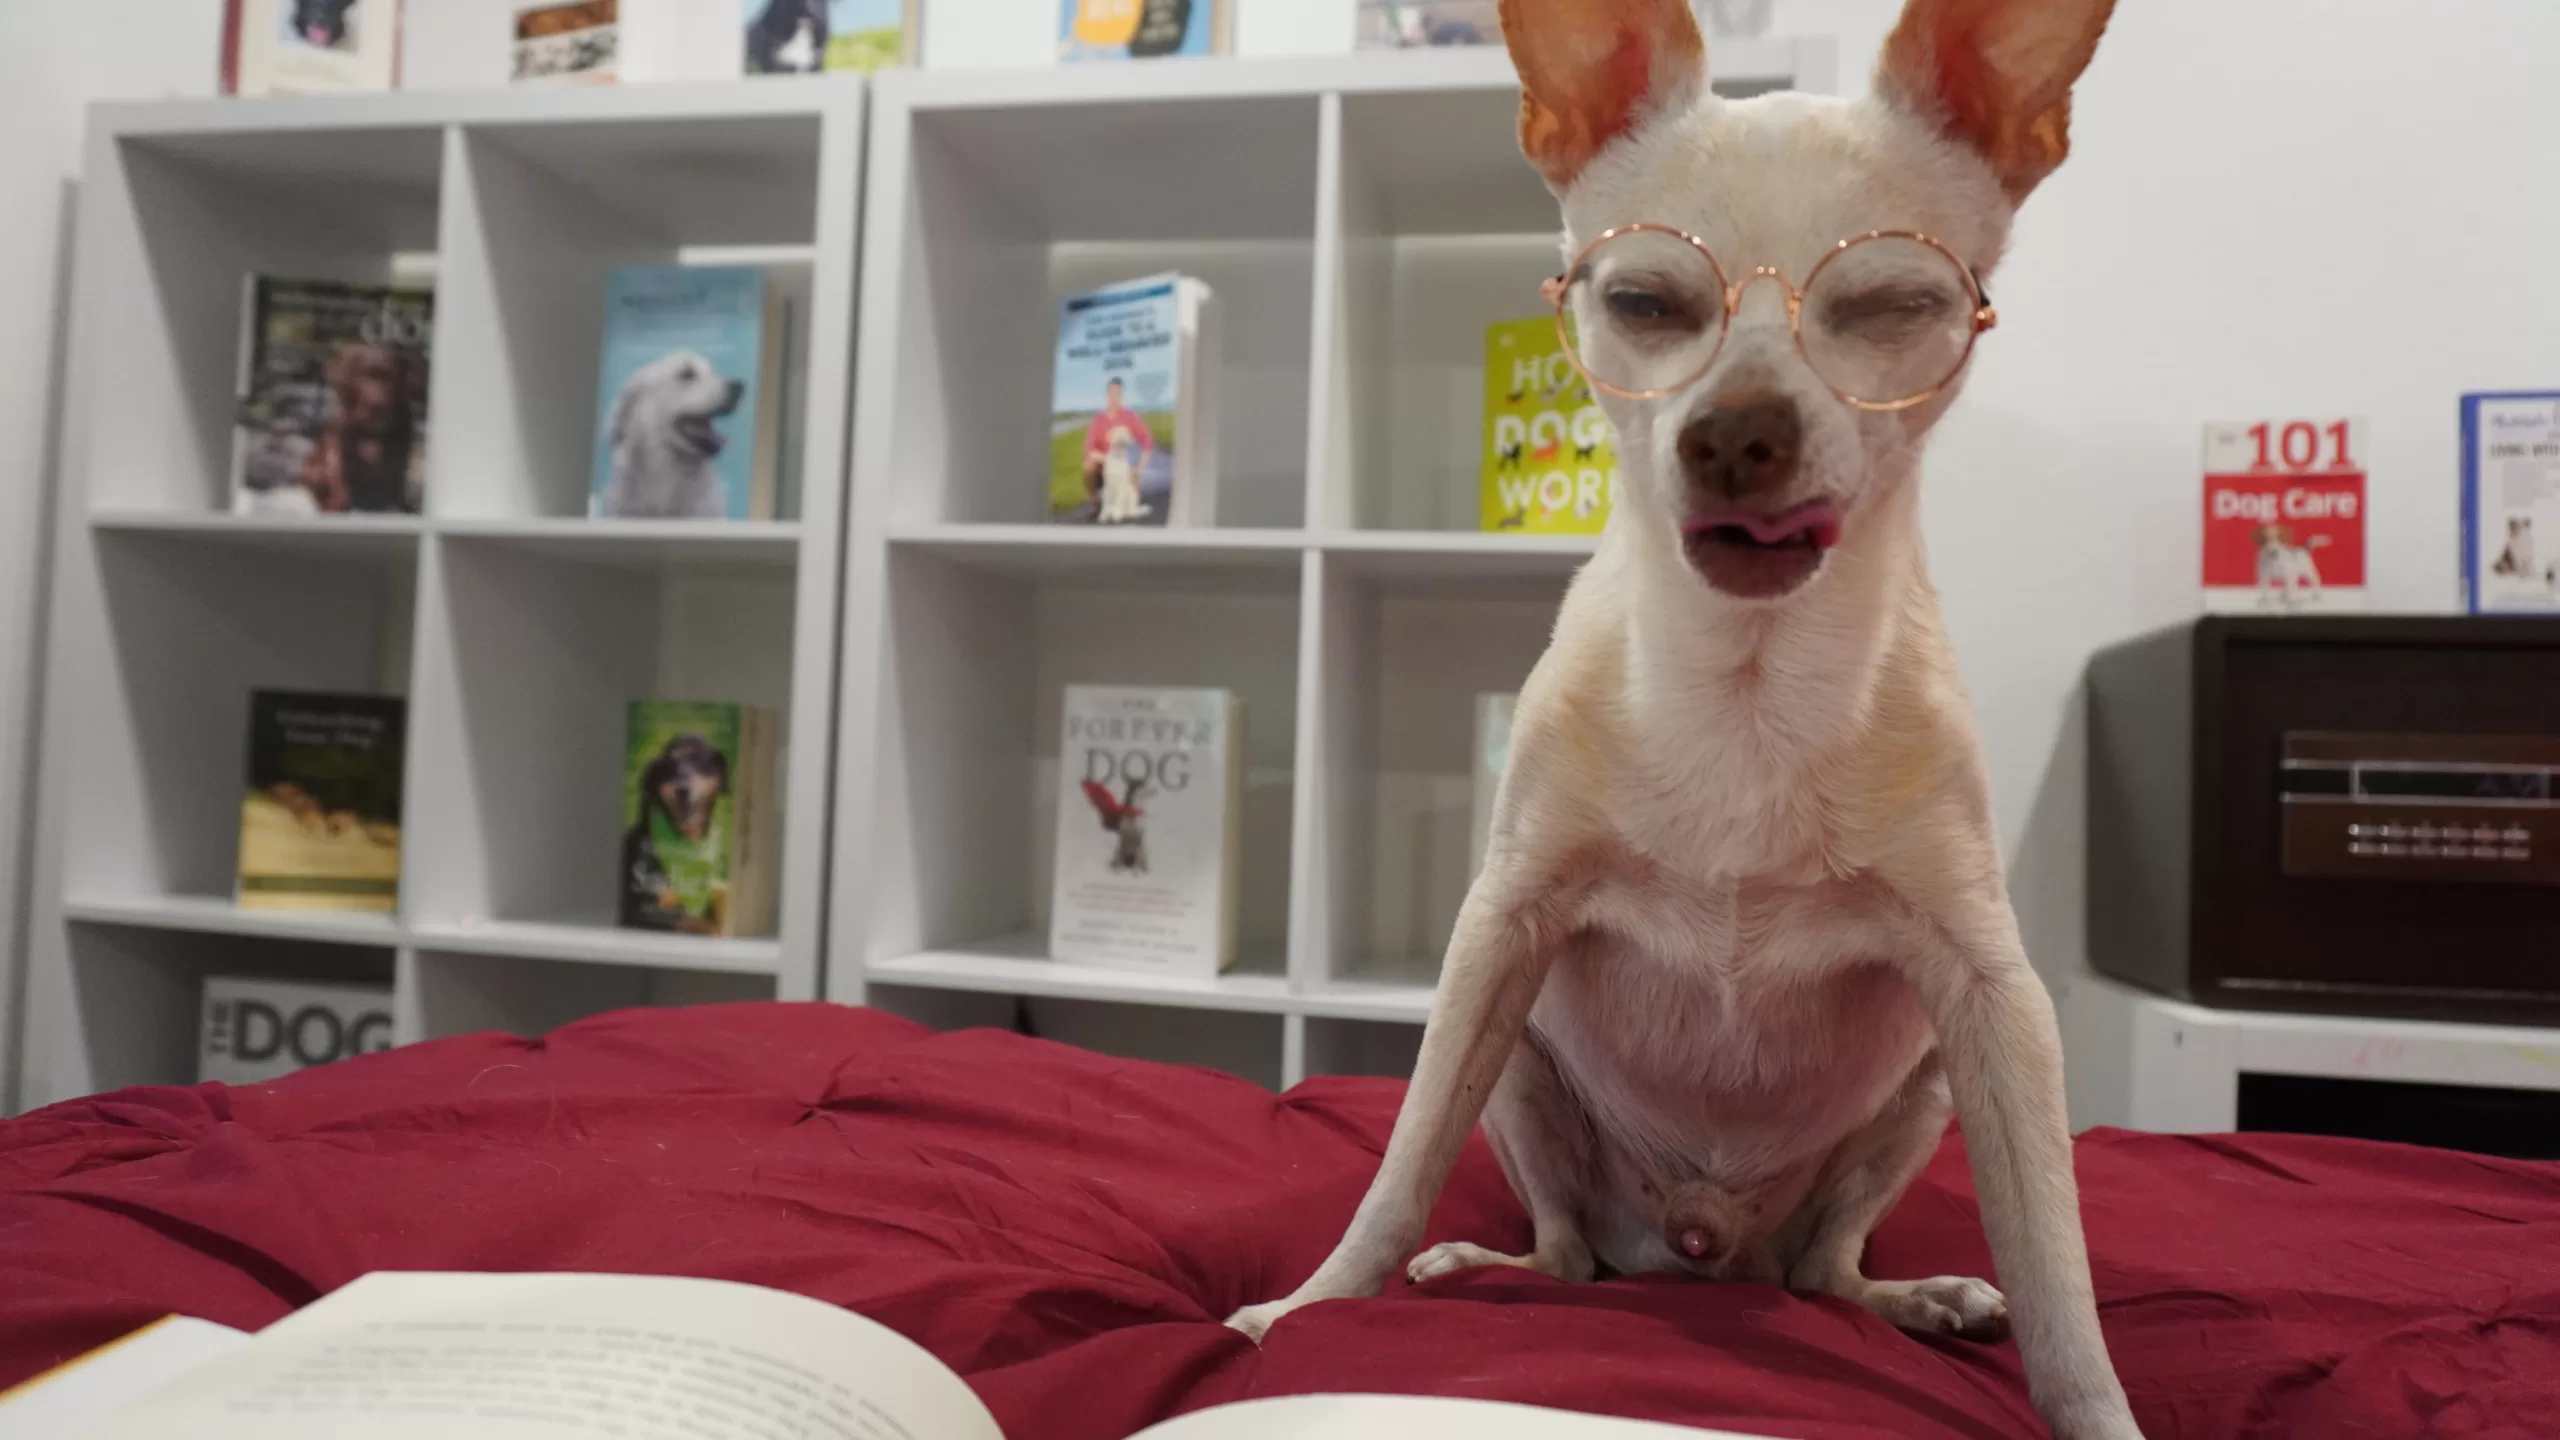 chihuahua wearing glasses reads a book. He is yawning, and his tongue pokes out just a little bit. Behind him are all the books in a reading challenge on shelves.